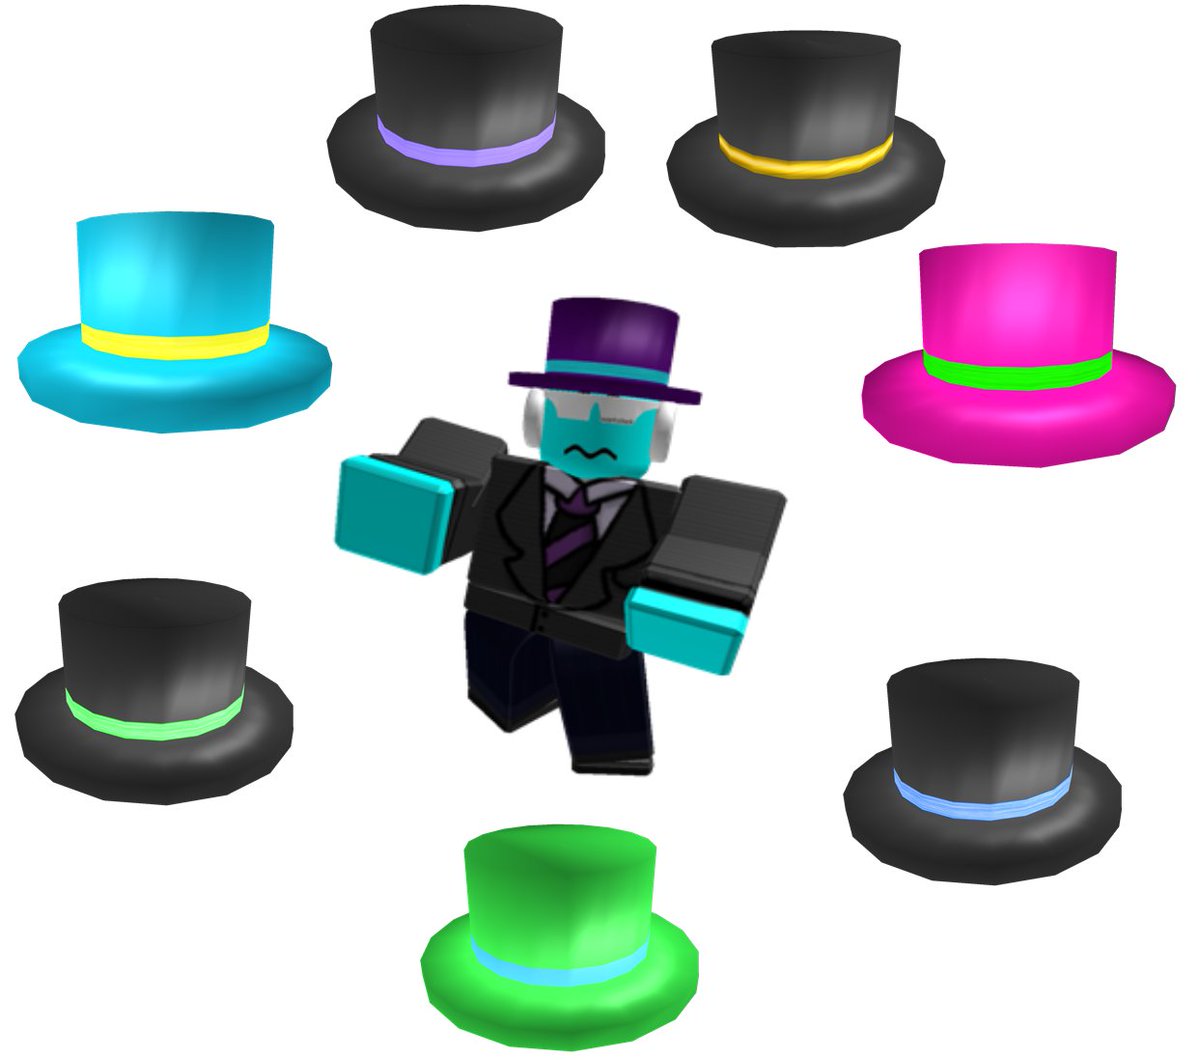 Icytea On Twitter Hahahhahaha Top Hats You Mean The Chaos